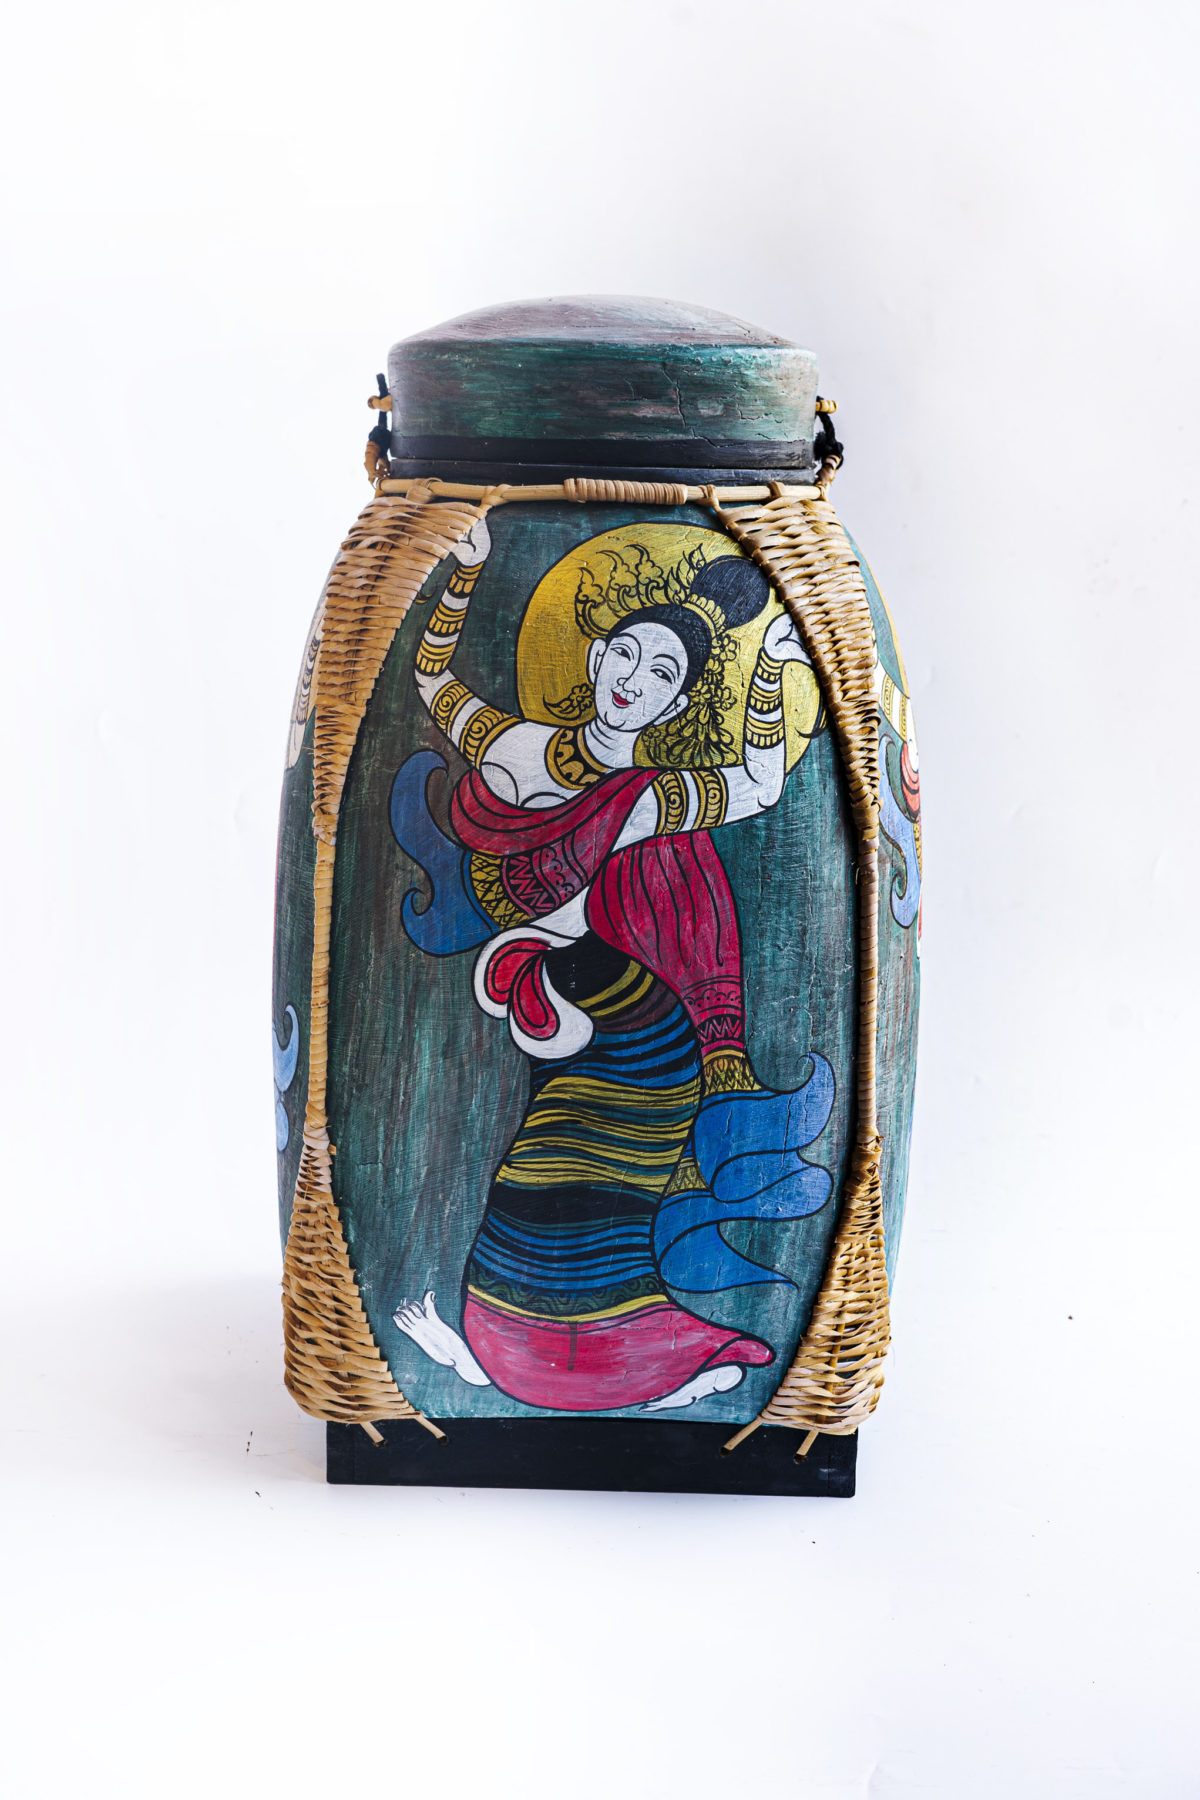 Lady painted on bamboo basket